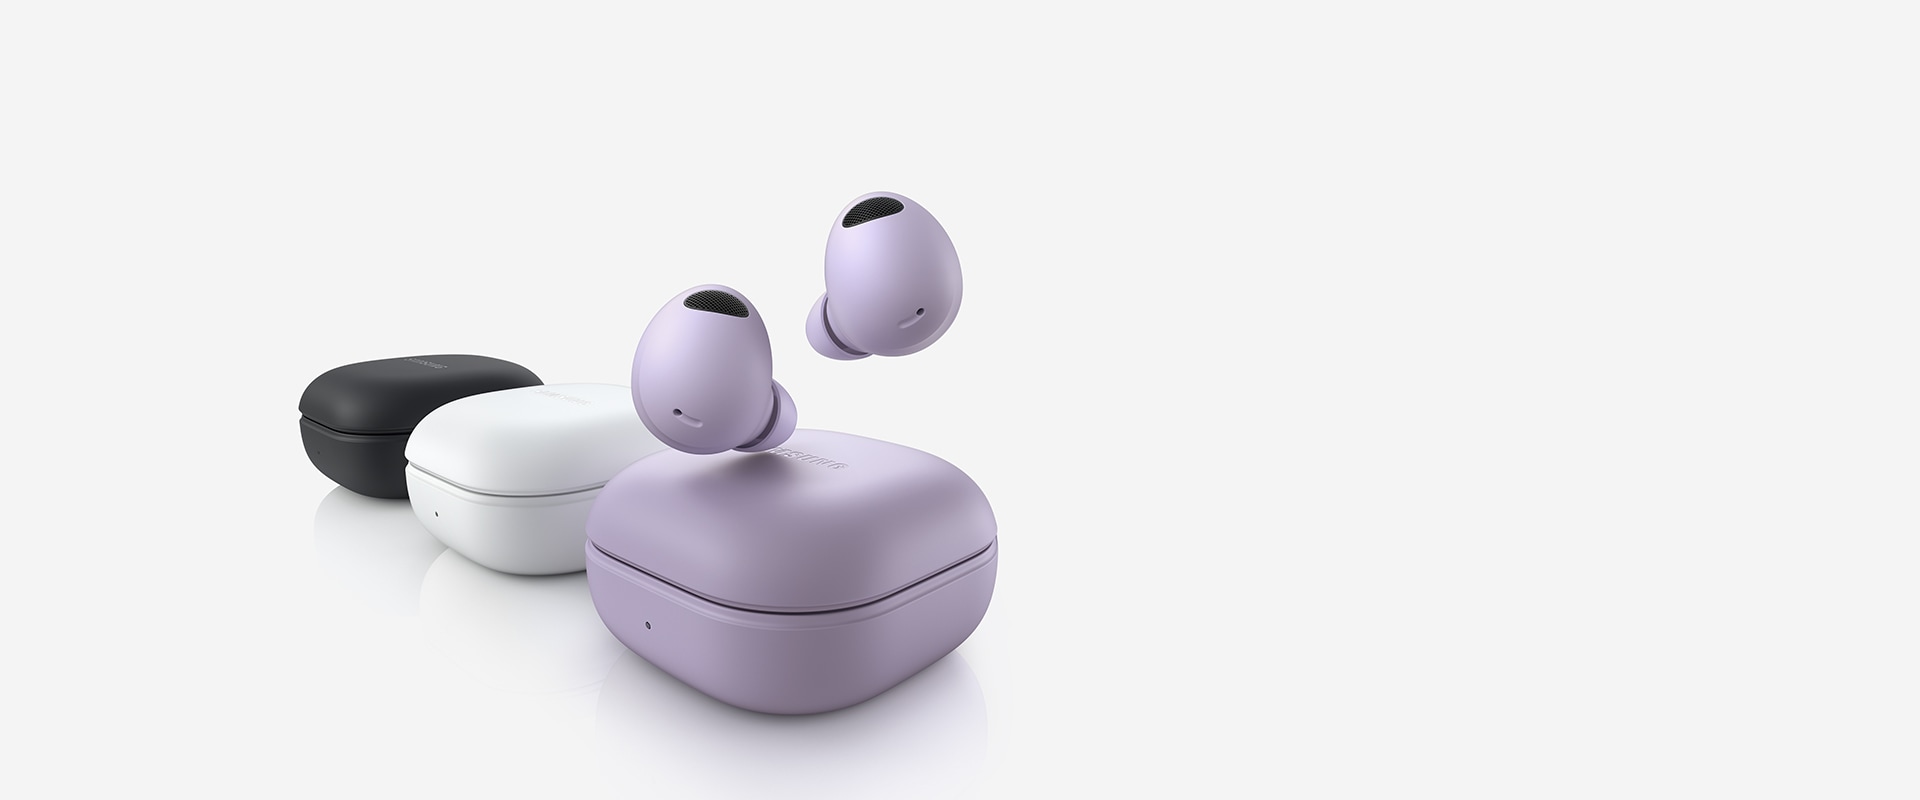 Three Galaxy Buds2 Pro devices are lined up. The Bora Purple Galaxy Buds2 Pro device in the front has two earbuds hovering above the closed case. The middle White closed case is followed by a closed Graphite Galaxy Buds2 Pro case.